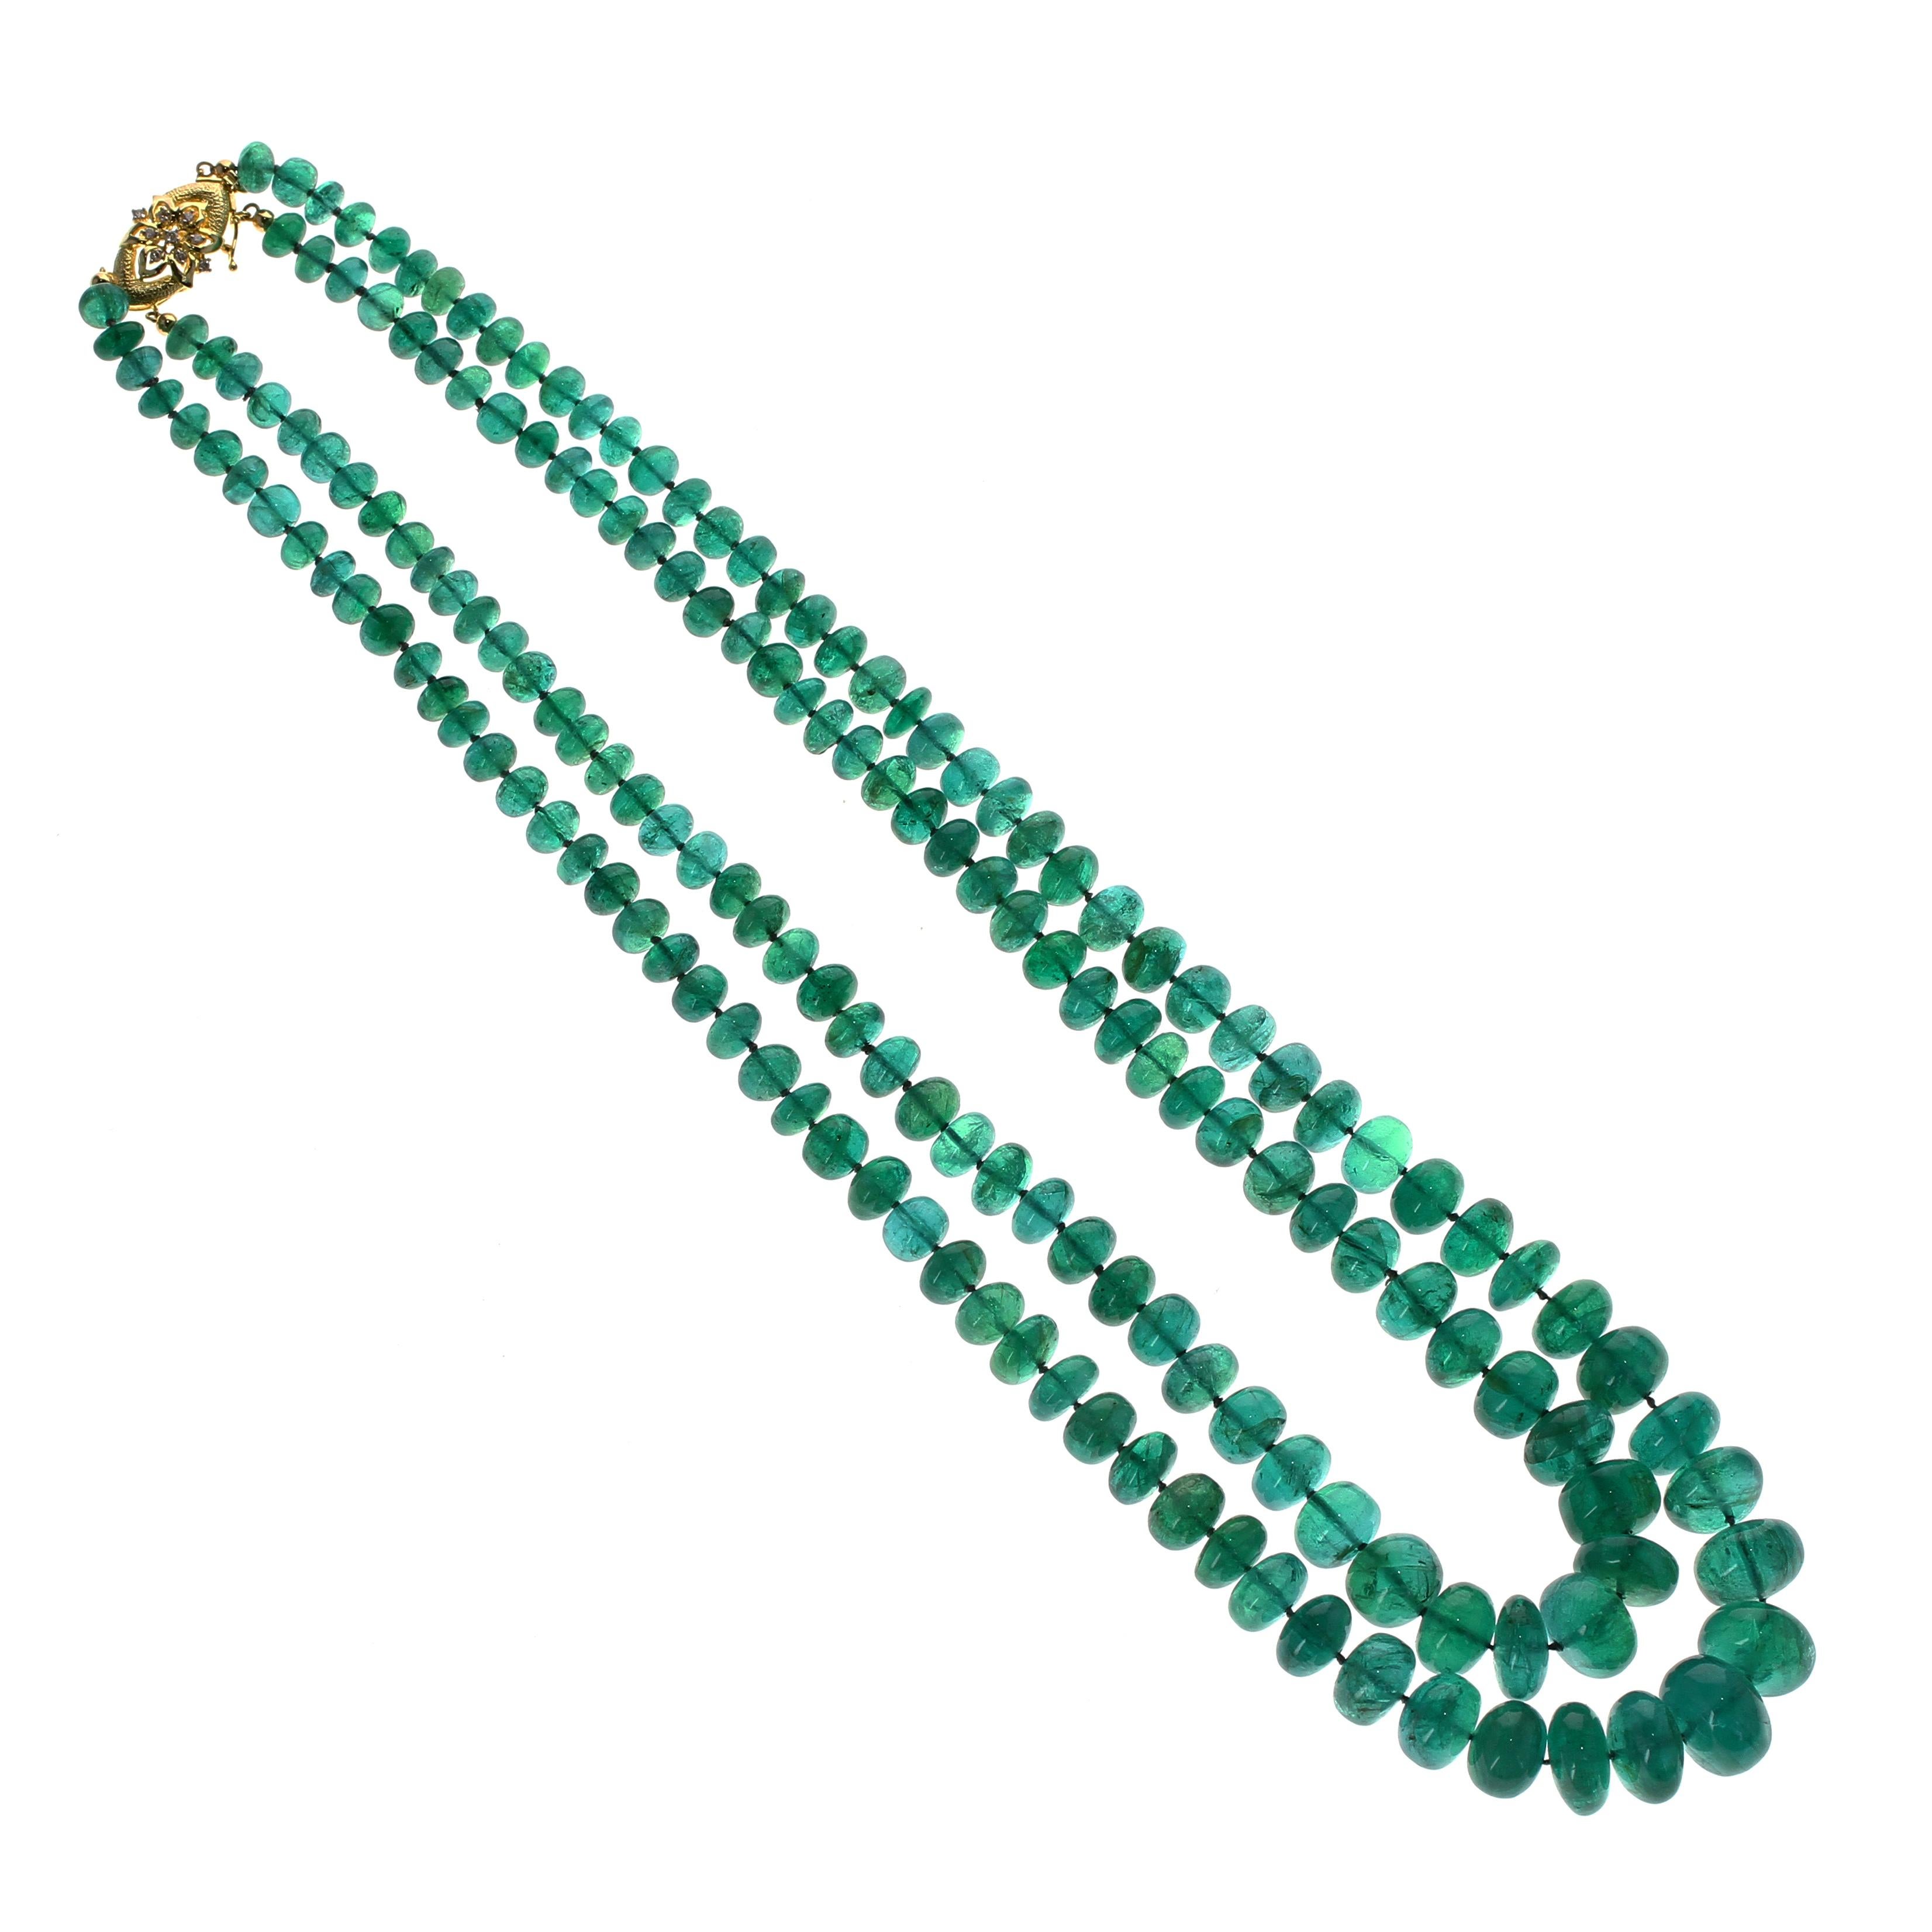 An impressive gemstone bead necklace strung with two rows of emeralds, measuring from 6.5 to 15 mm, and weighing approximately 645 carats (with clasp). The yellow gold clasp with diamonds is for presentation purposes only can be re-designed or